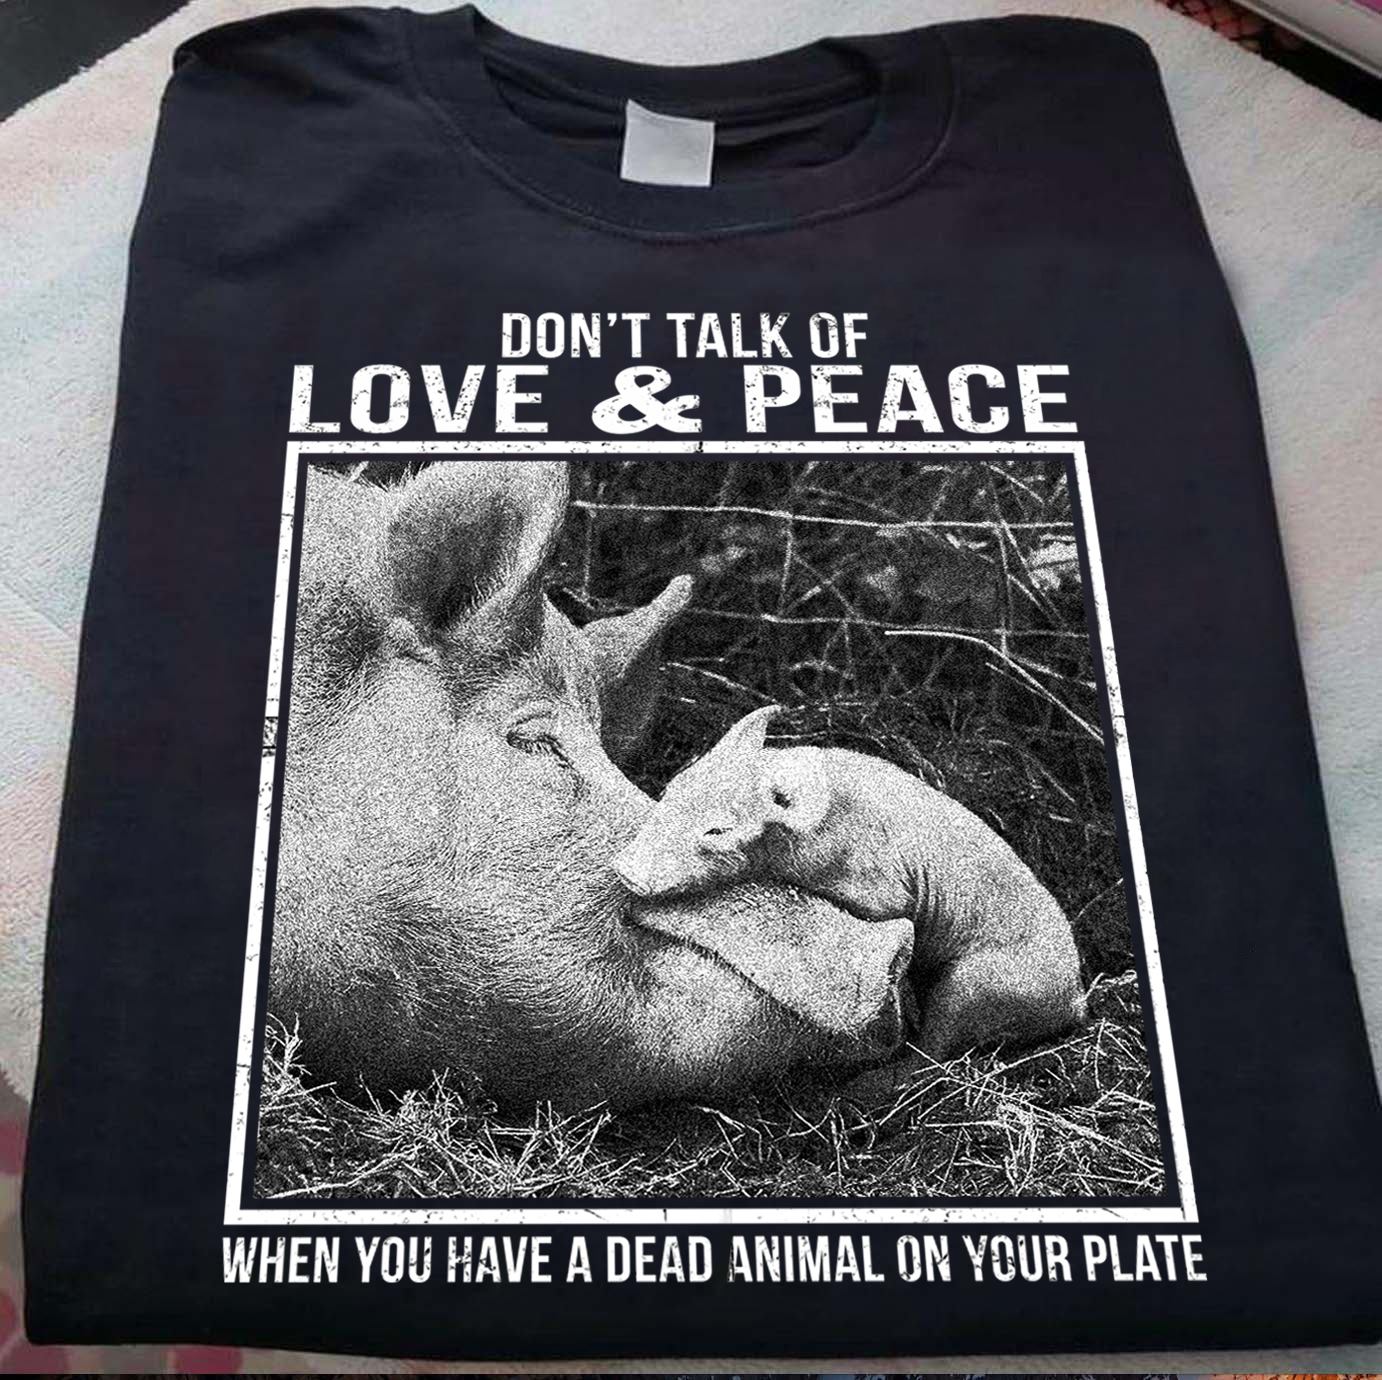 From Two Pig With Love - Don't Talk Of Love & Peace, When You Have A Dead Animal On Your Plate